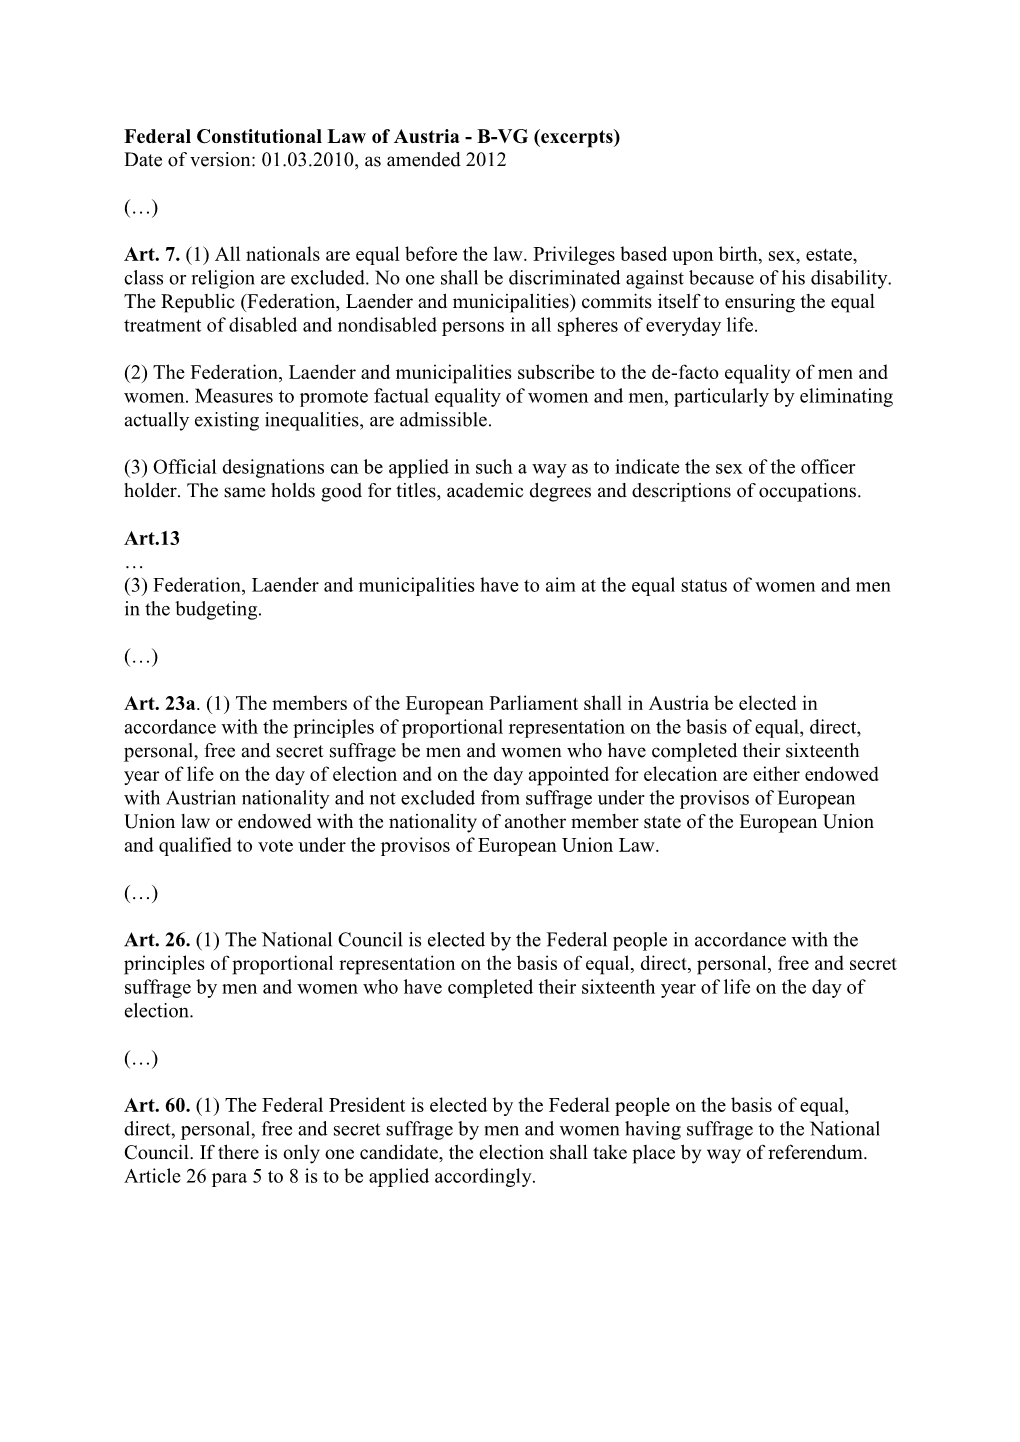 Federal Constitutional Law of Austria - B-VG (Excerpts) Date of Version: 01.03.2010, As Amended 2012